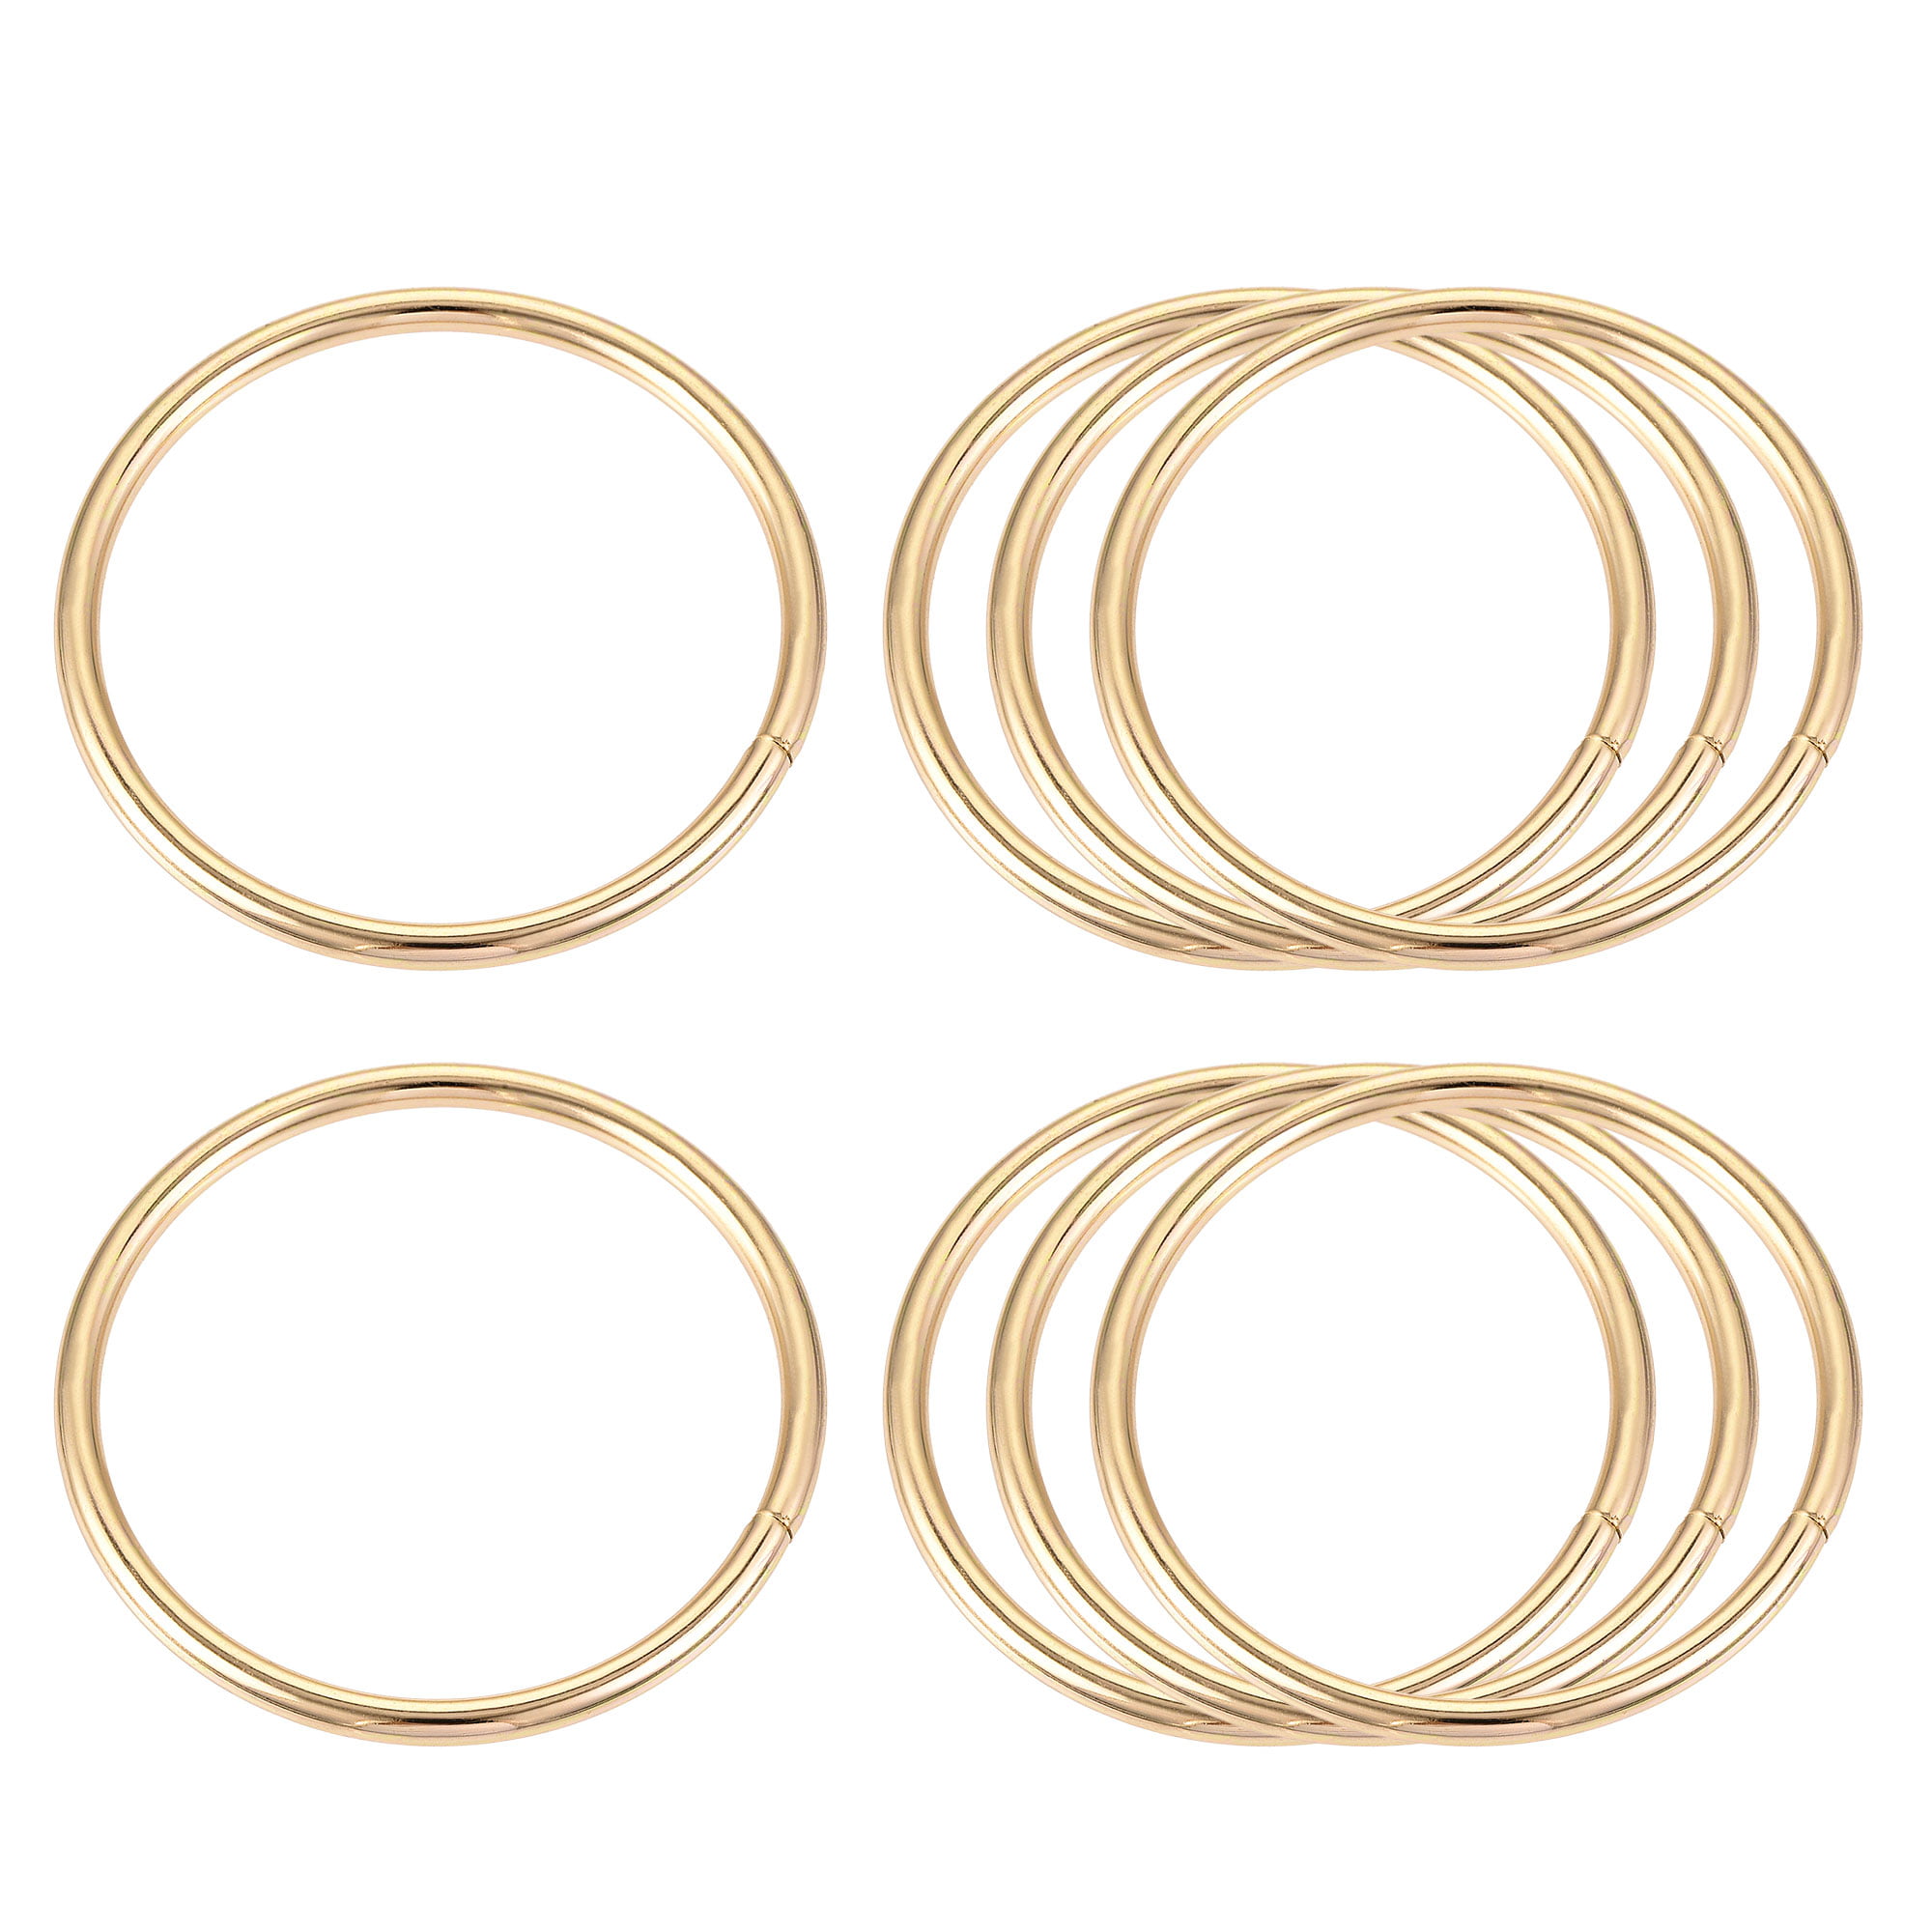 Band Plastic|pvc O-rings For Bags, Garments & Shoes - 25mm-50mm Inner Dia,  5-20pcs Pack